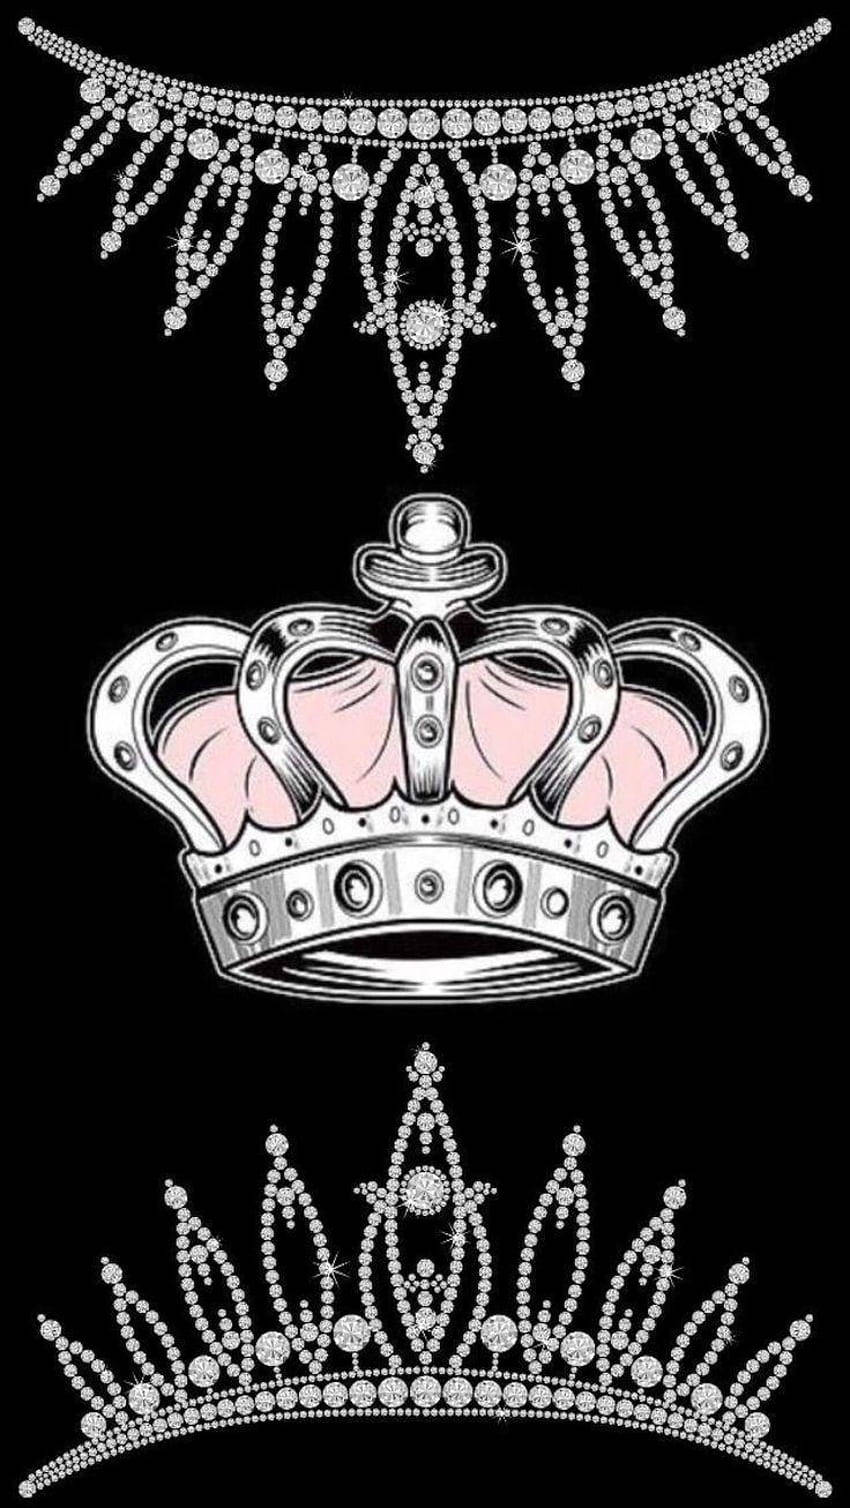 King And Queen Crown And Tiara Wallpaper